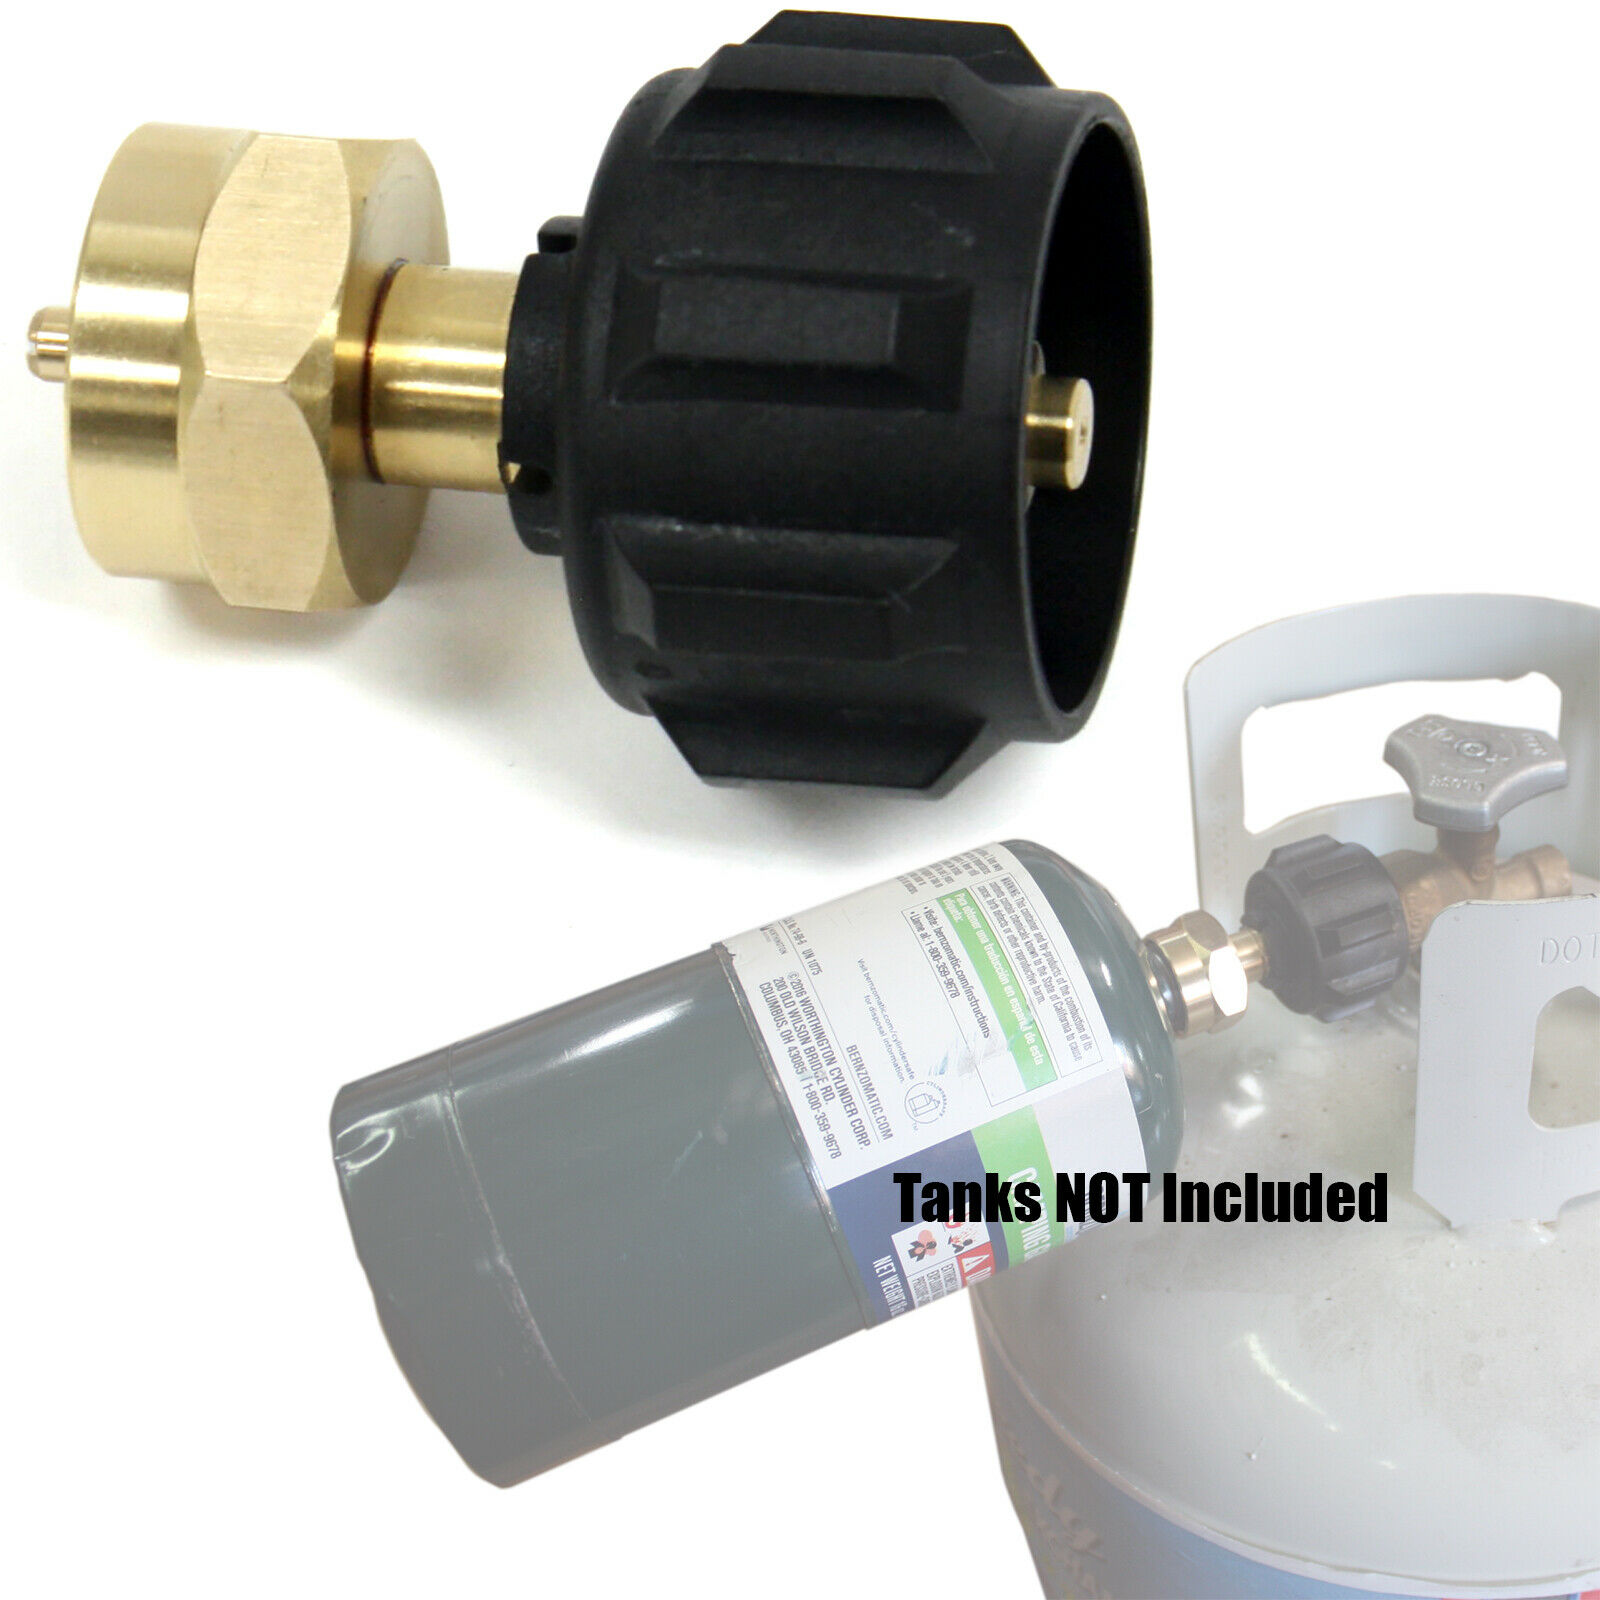 Propane Tank Adapter 5 Feet Hose and Refill Tank Adapter for 1lb to 20lb Tanks 